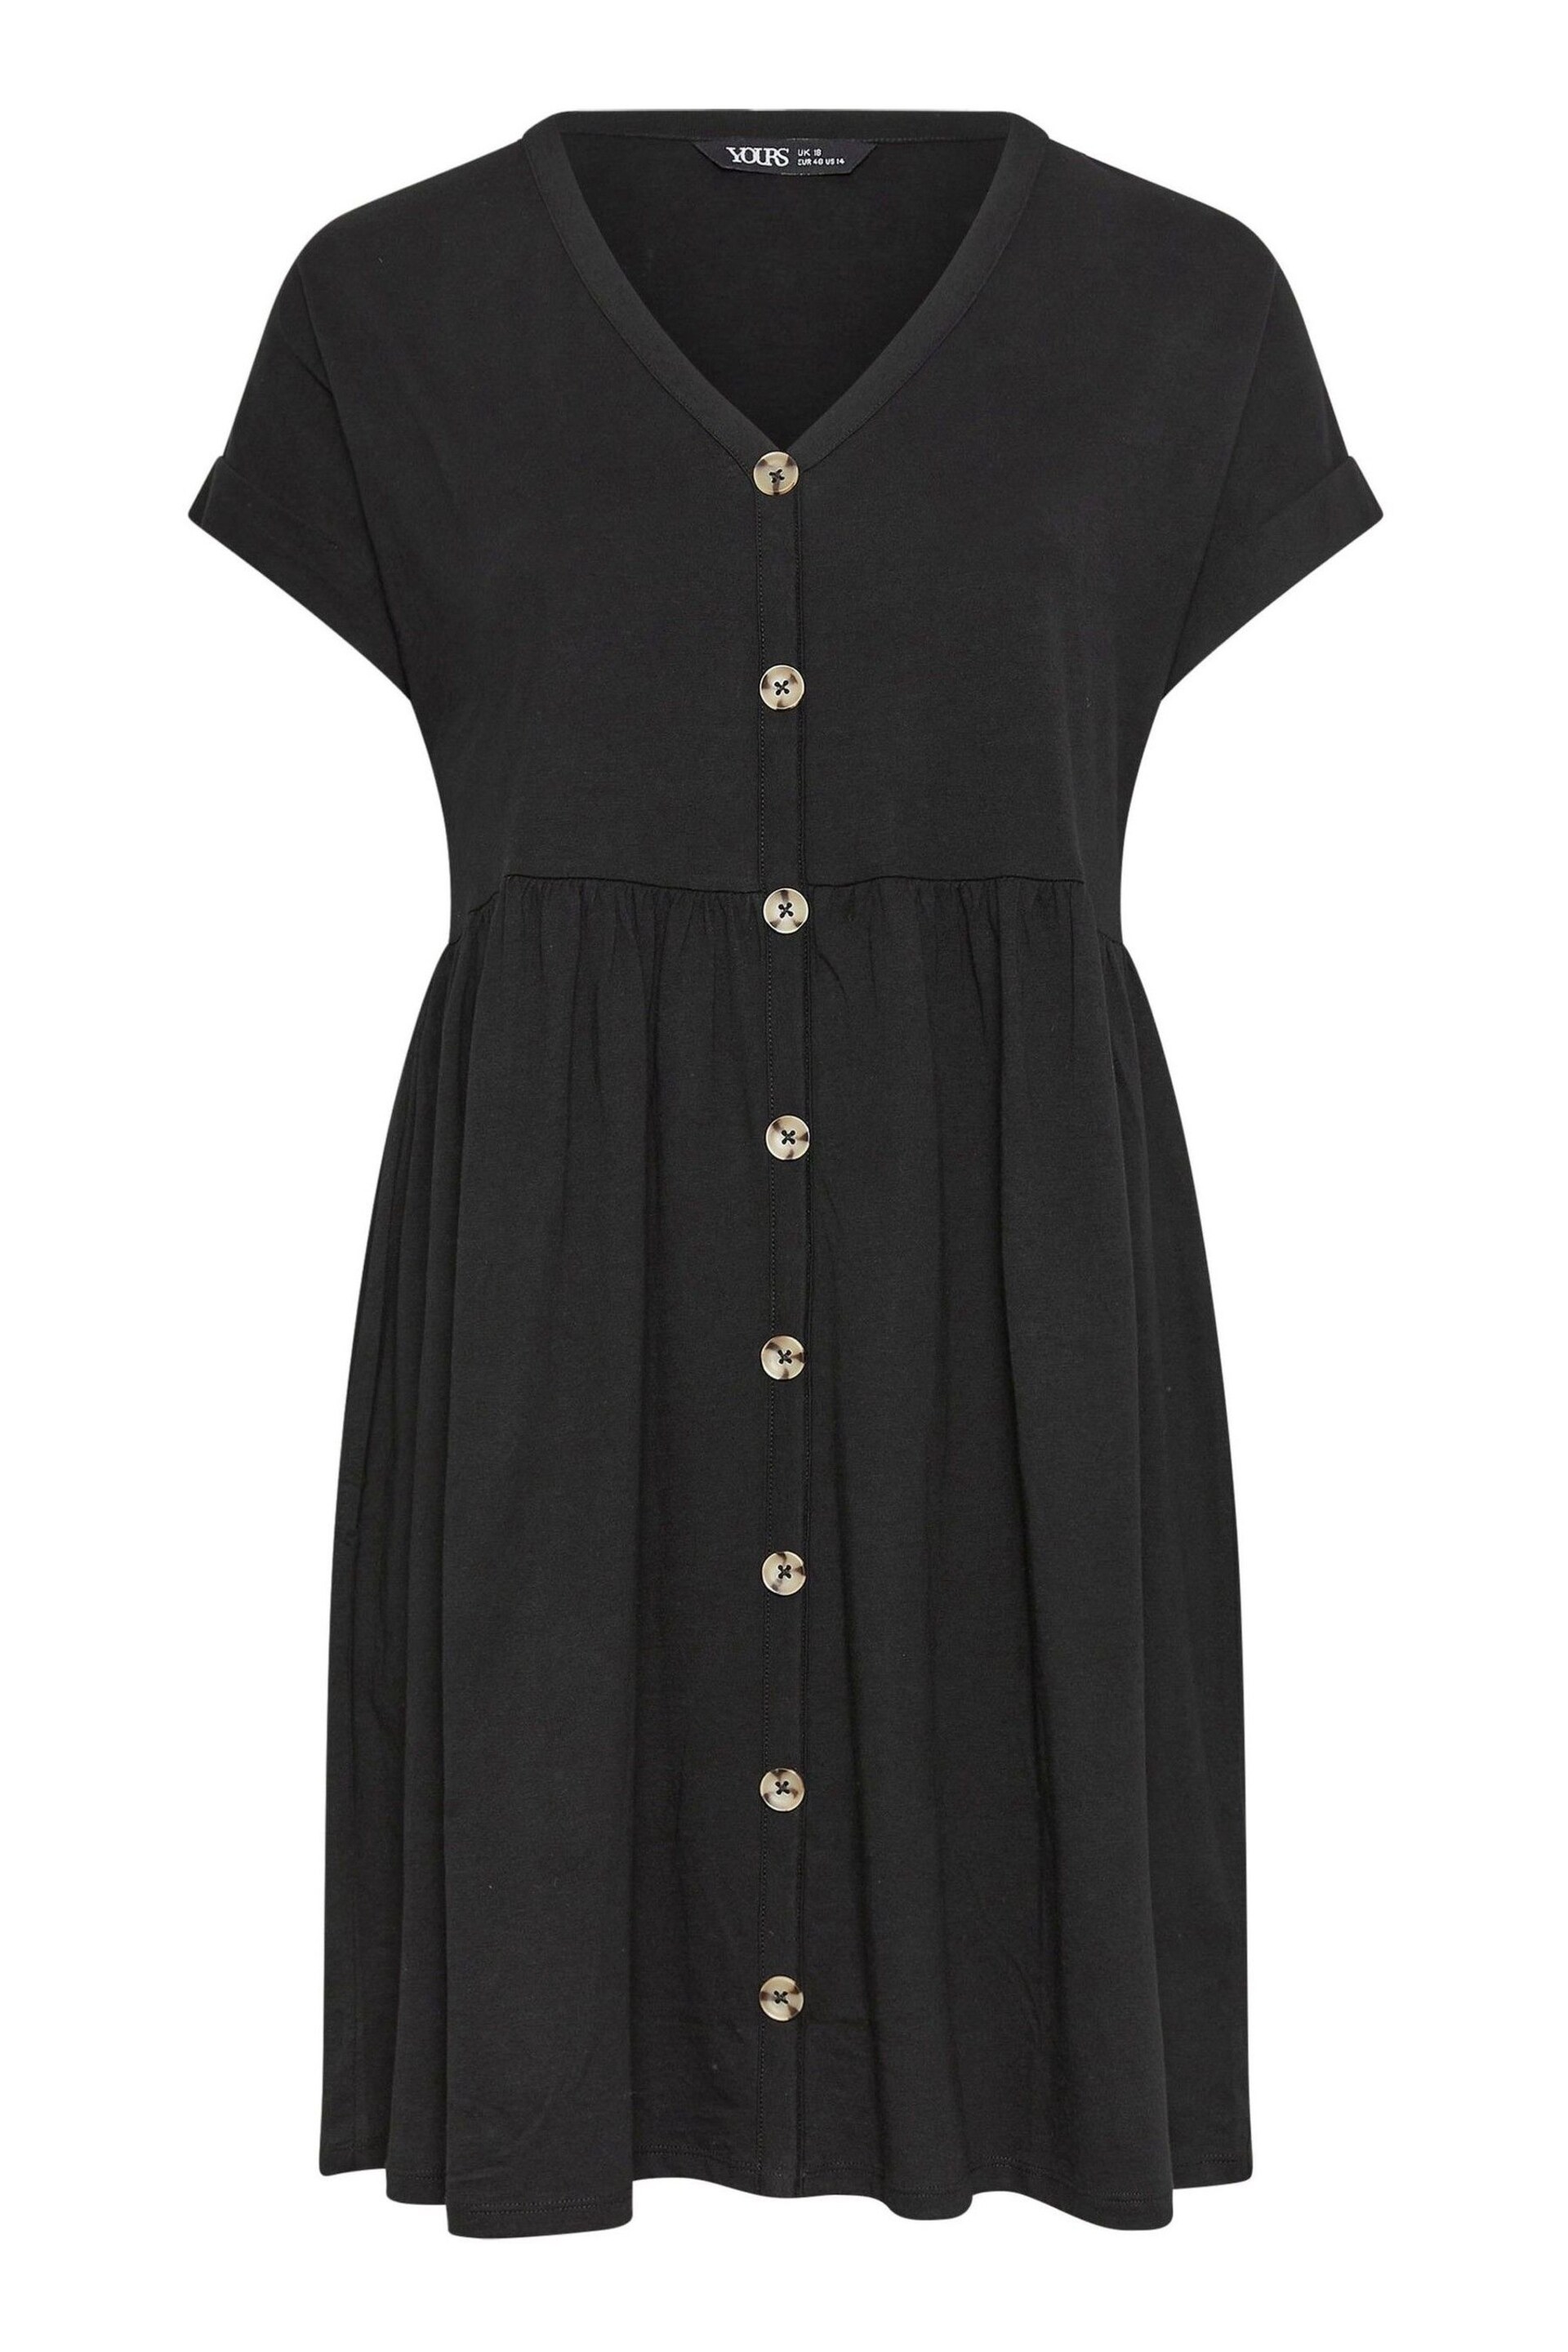 Yours Curve Black Limited Button Front Smock Dress - Image 5 of 5